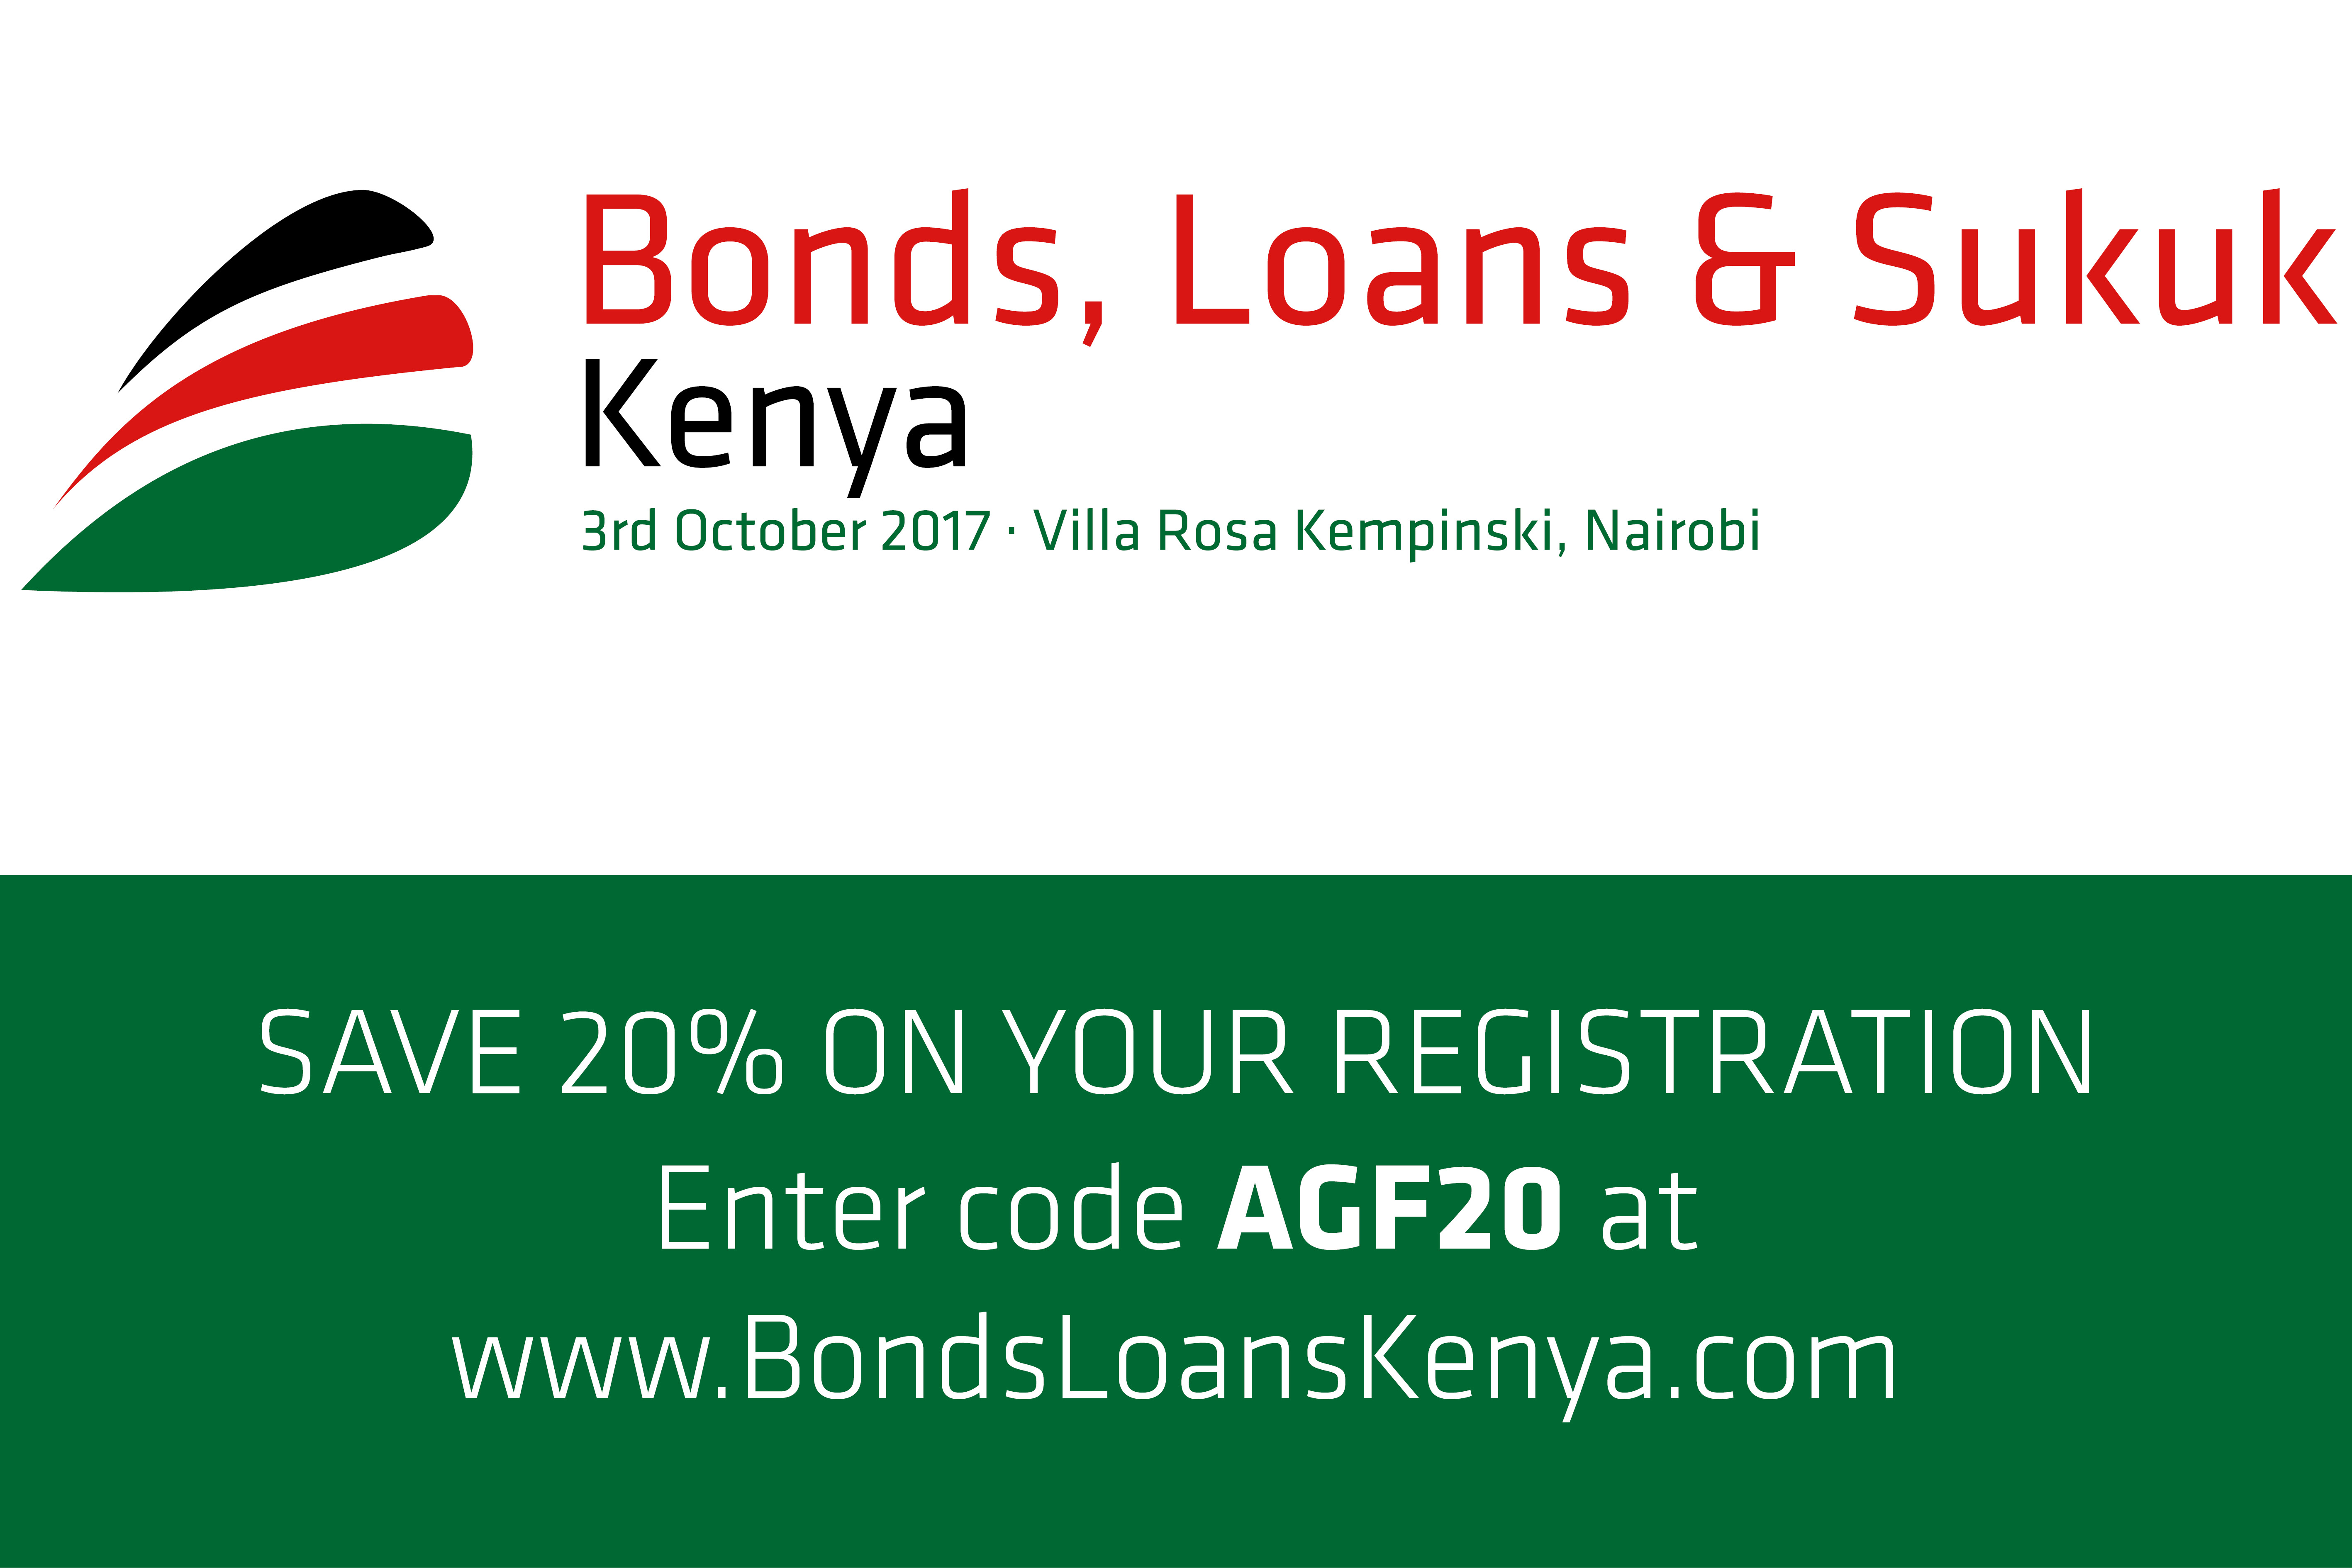 <p><strong>Bonds, Loans &amp; Sukuk Kenya</strong> is Kenya's only annual credit event and brings together government officials, borrowers, issuers, regulators, bankers, investors and advisors to discuss and debate pertinent developments in Kenya’s debt capital markets (bonds, loans and sukuk).</p>
